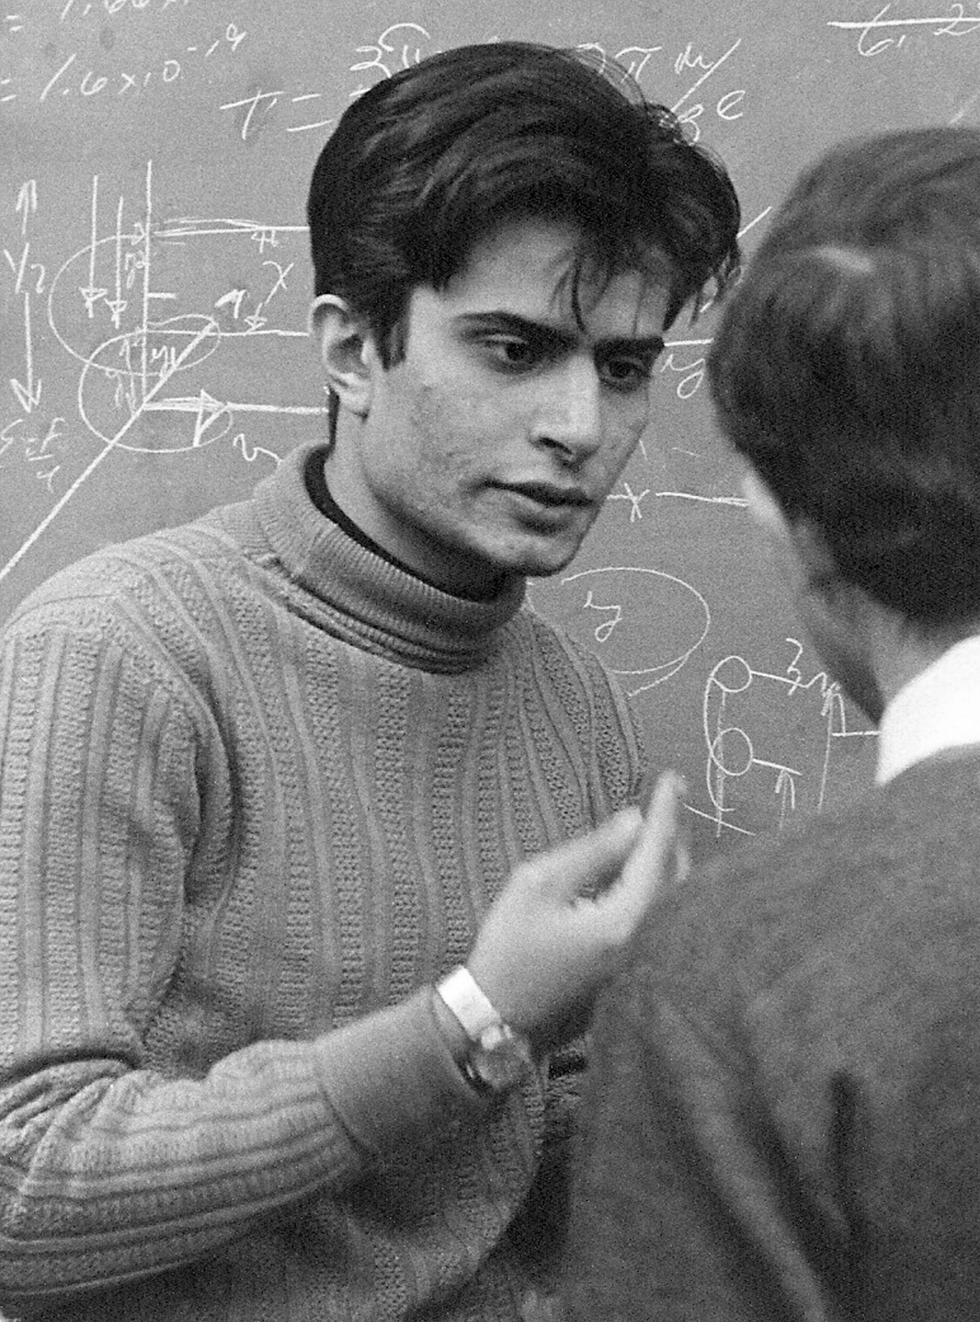 Photo of a young man in a sweater talking to another man in front of a balckboard